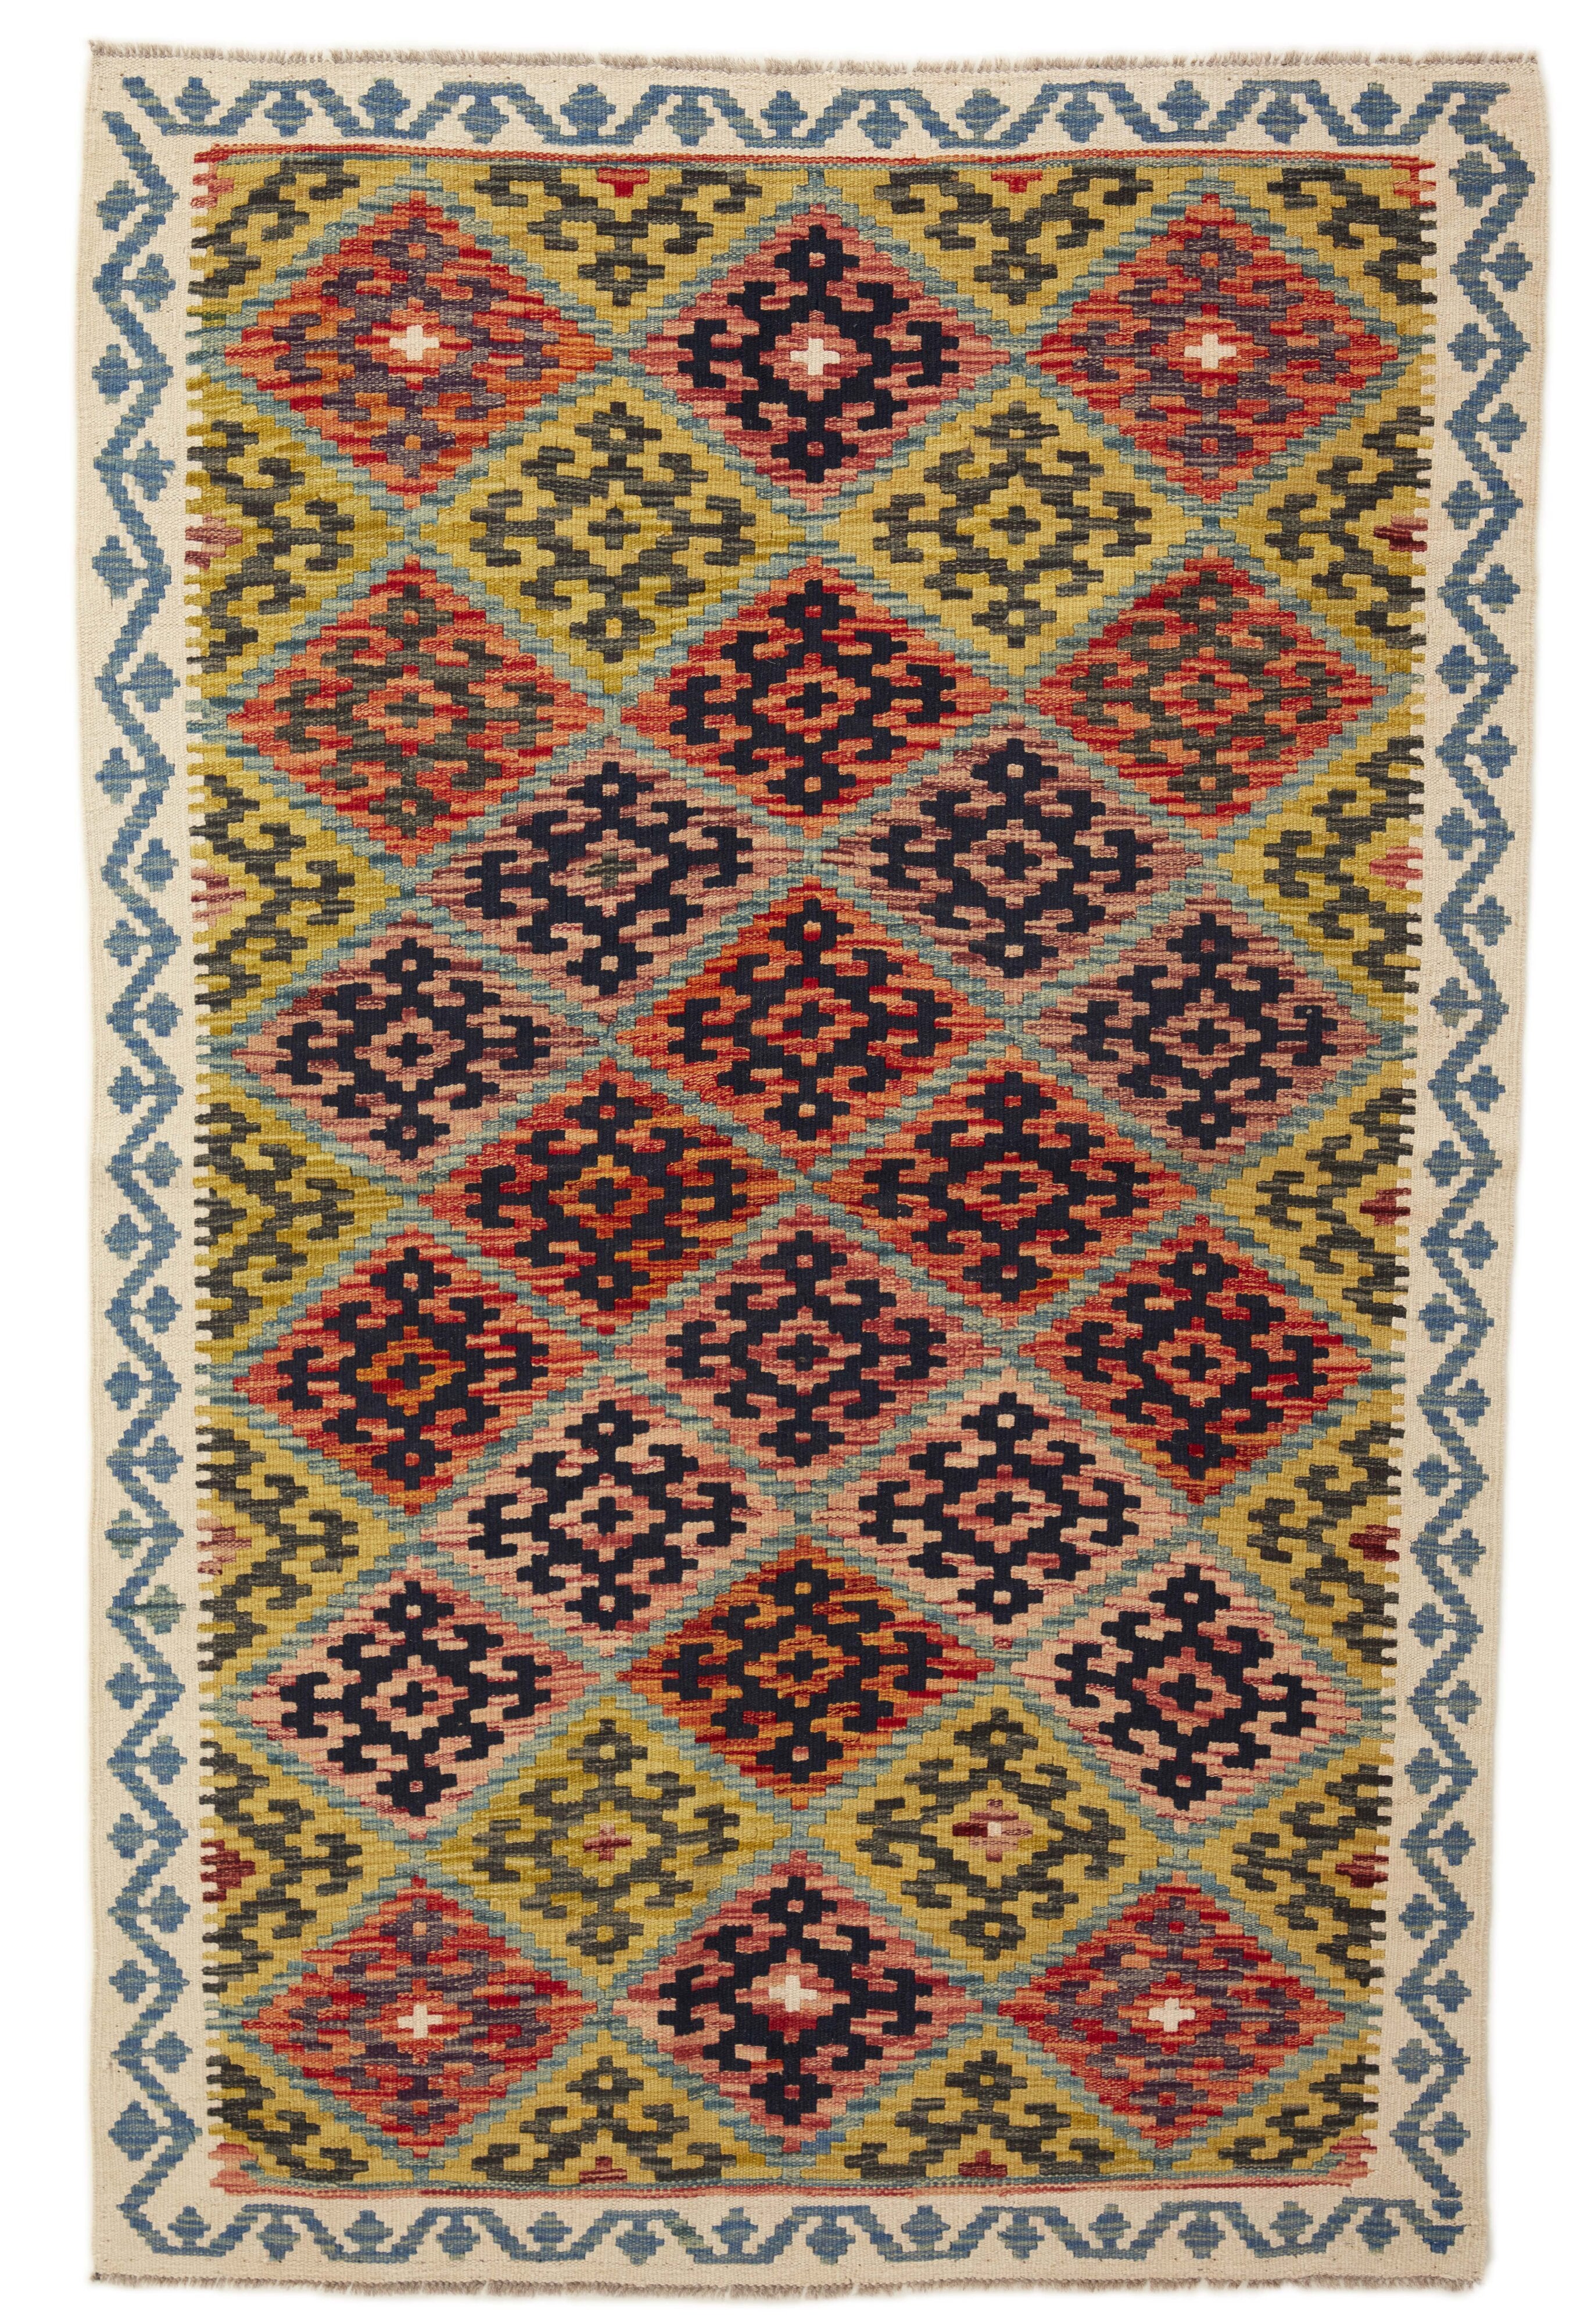 Authentic Persian Kilim flatweave rug with traditional multicolour pattern